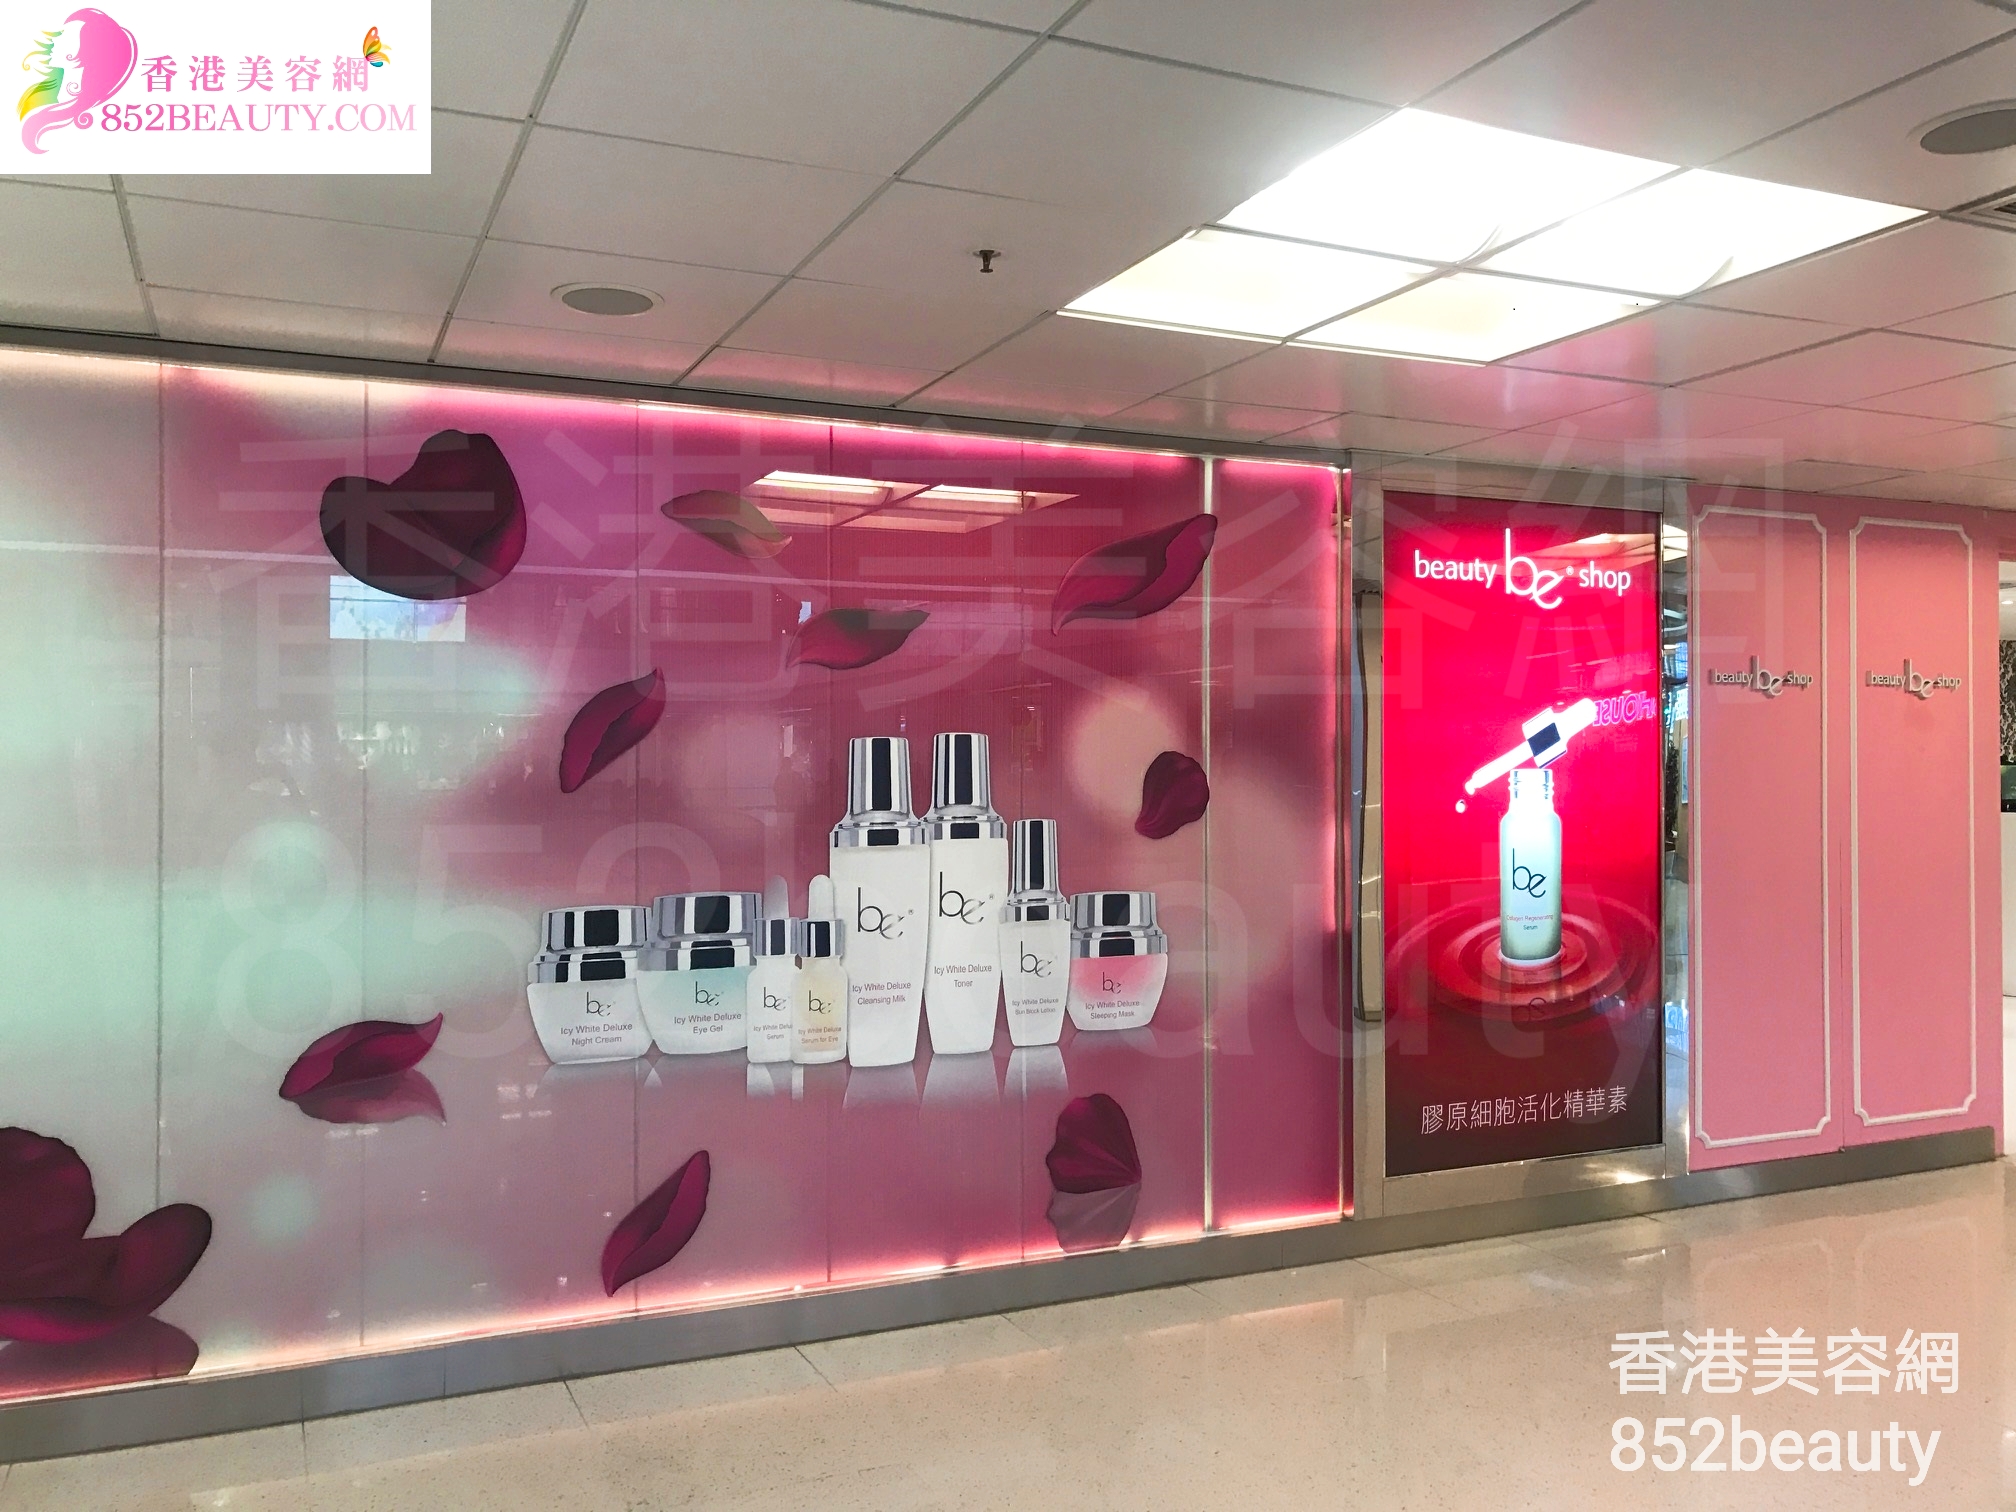 Hand and foot care: be beauty shop (大埔廣場)